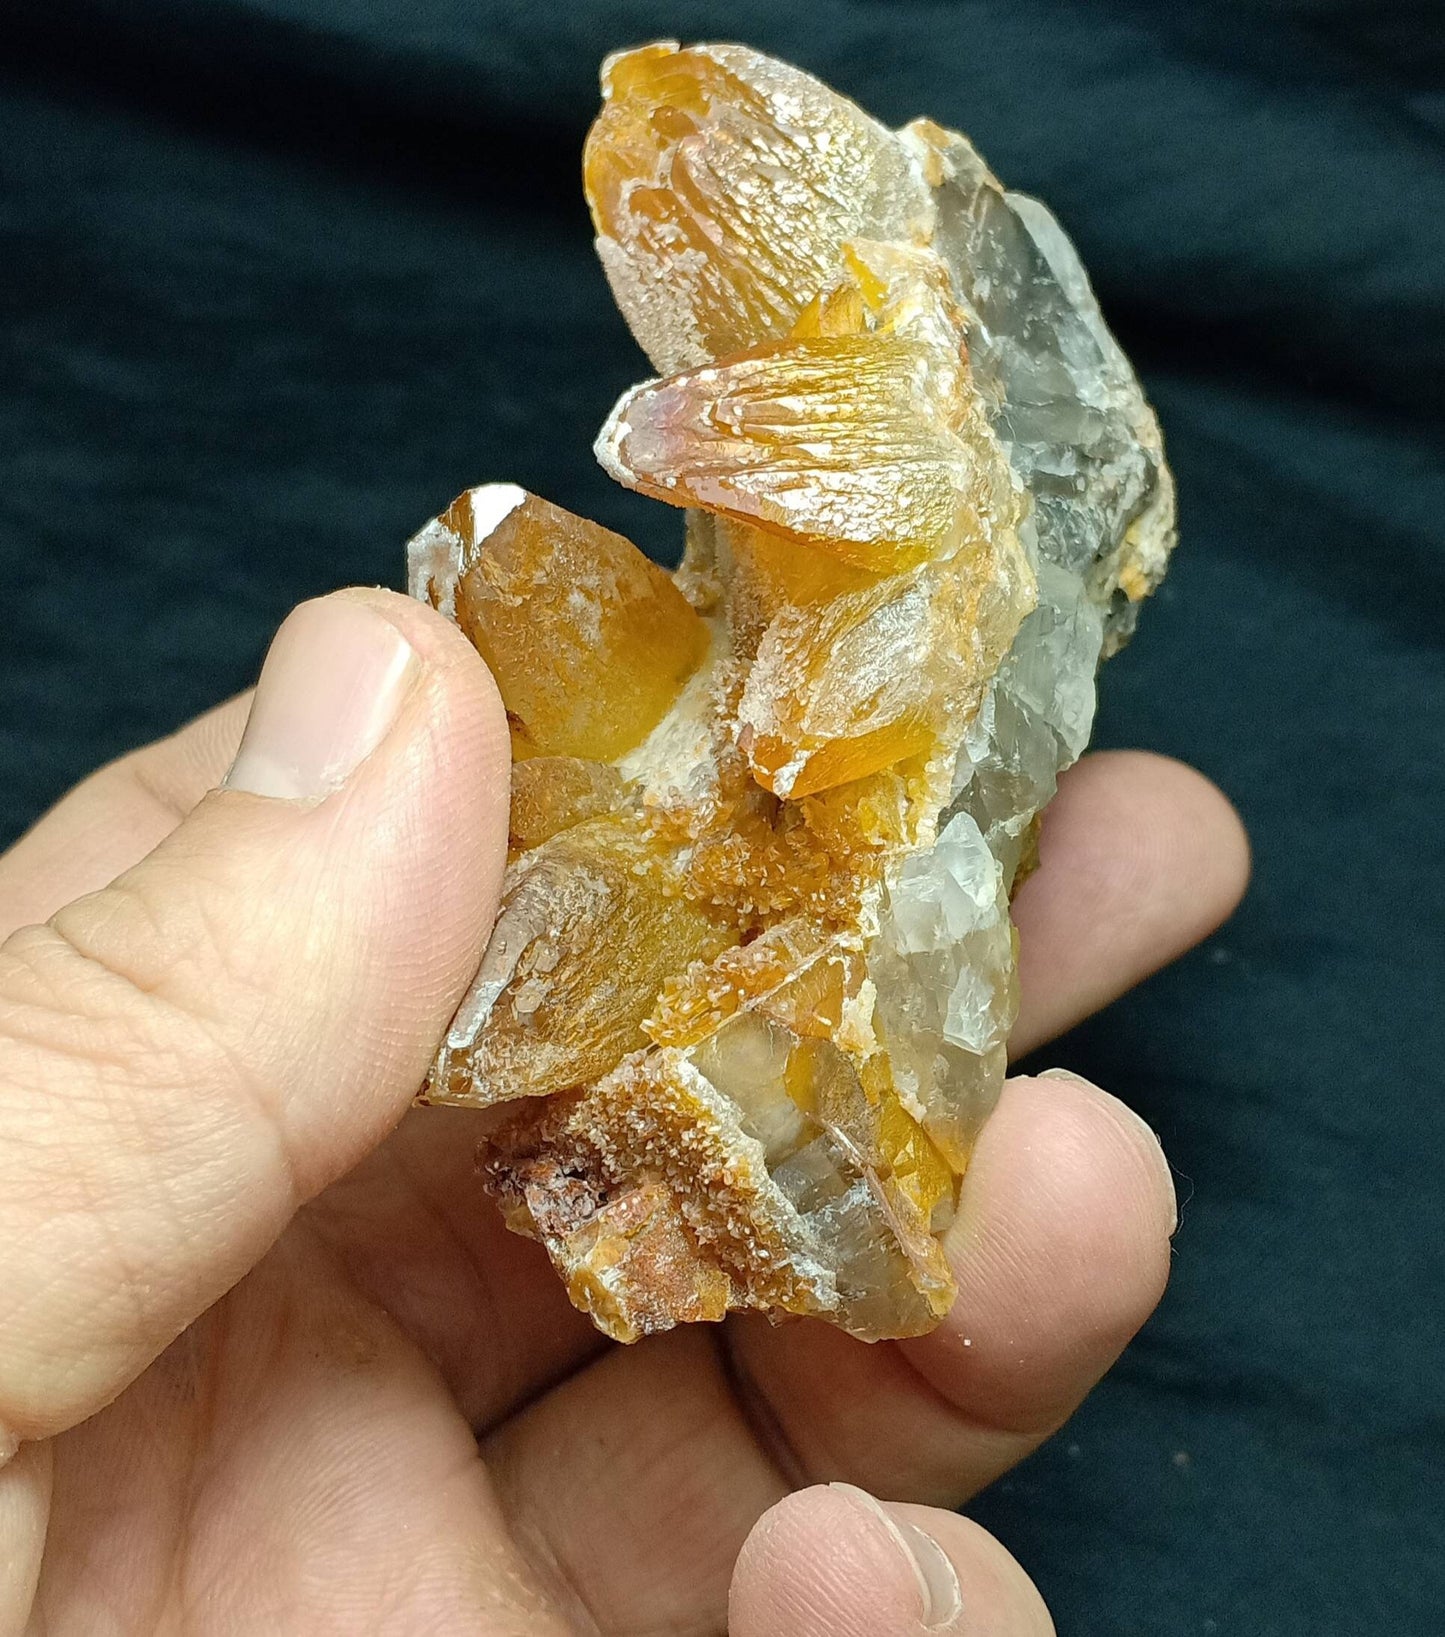 An amazing specimen of Dogteeth calcite crystals with perfect terminations 212 grams